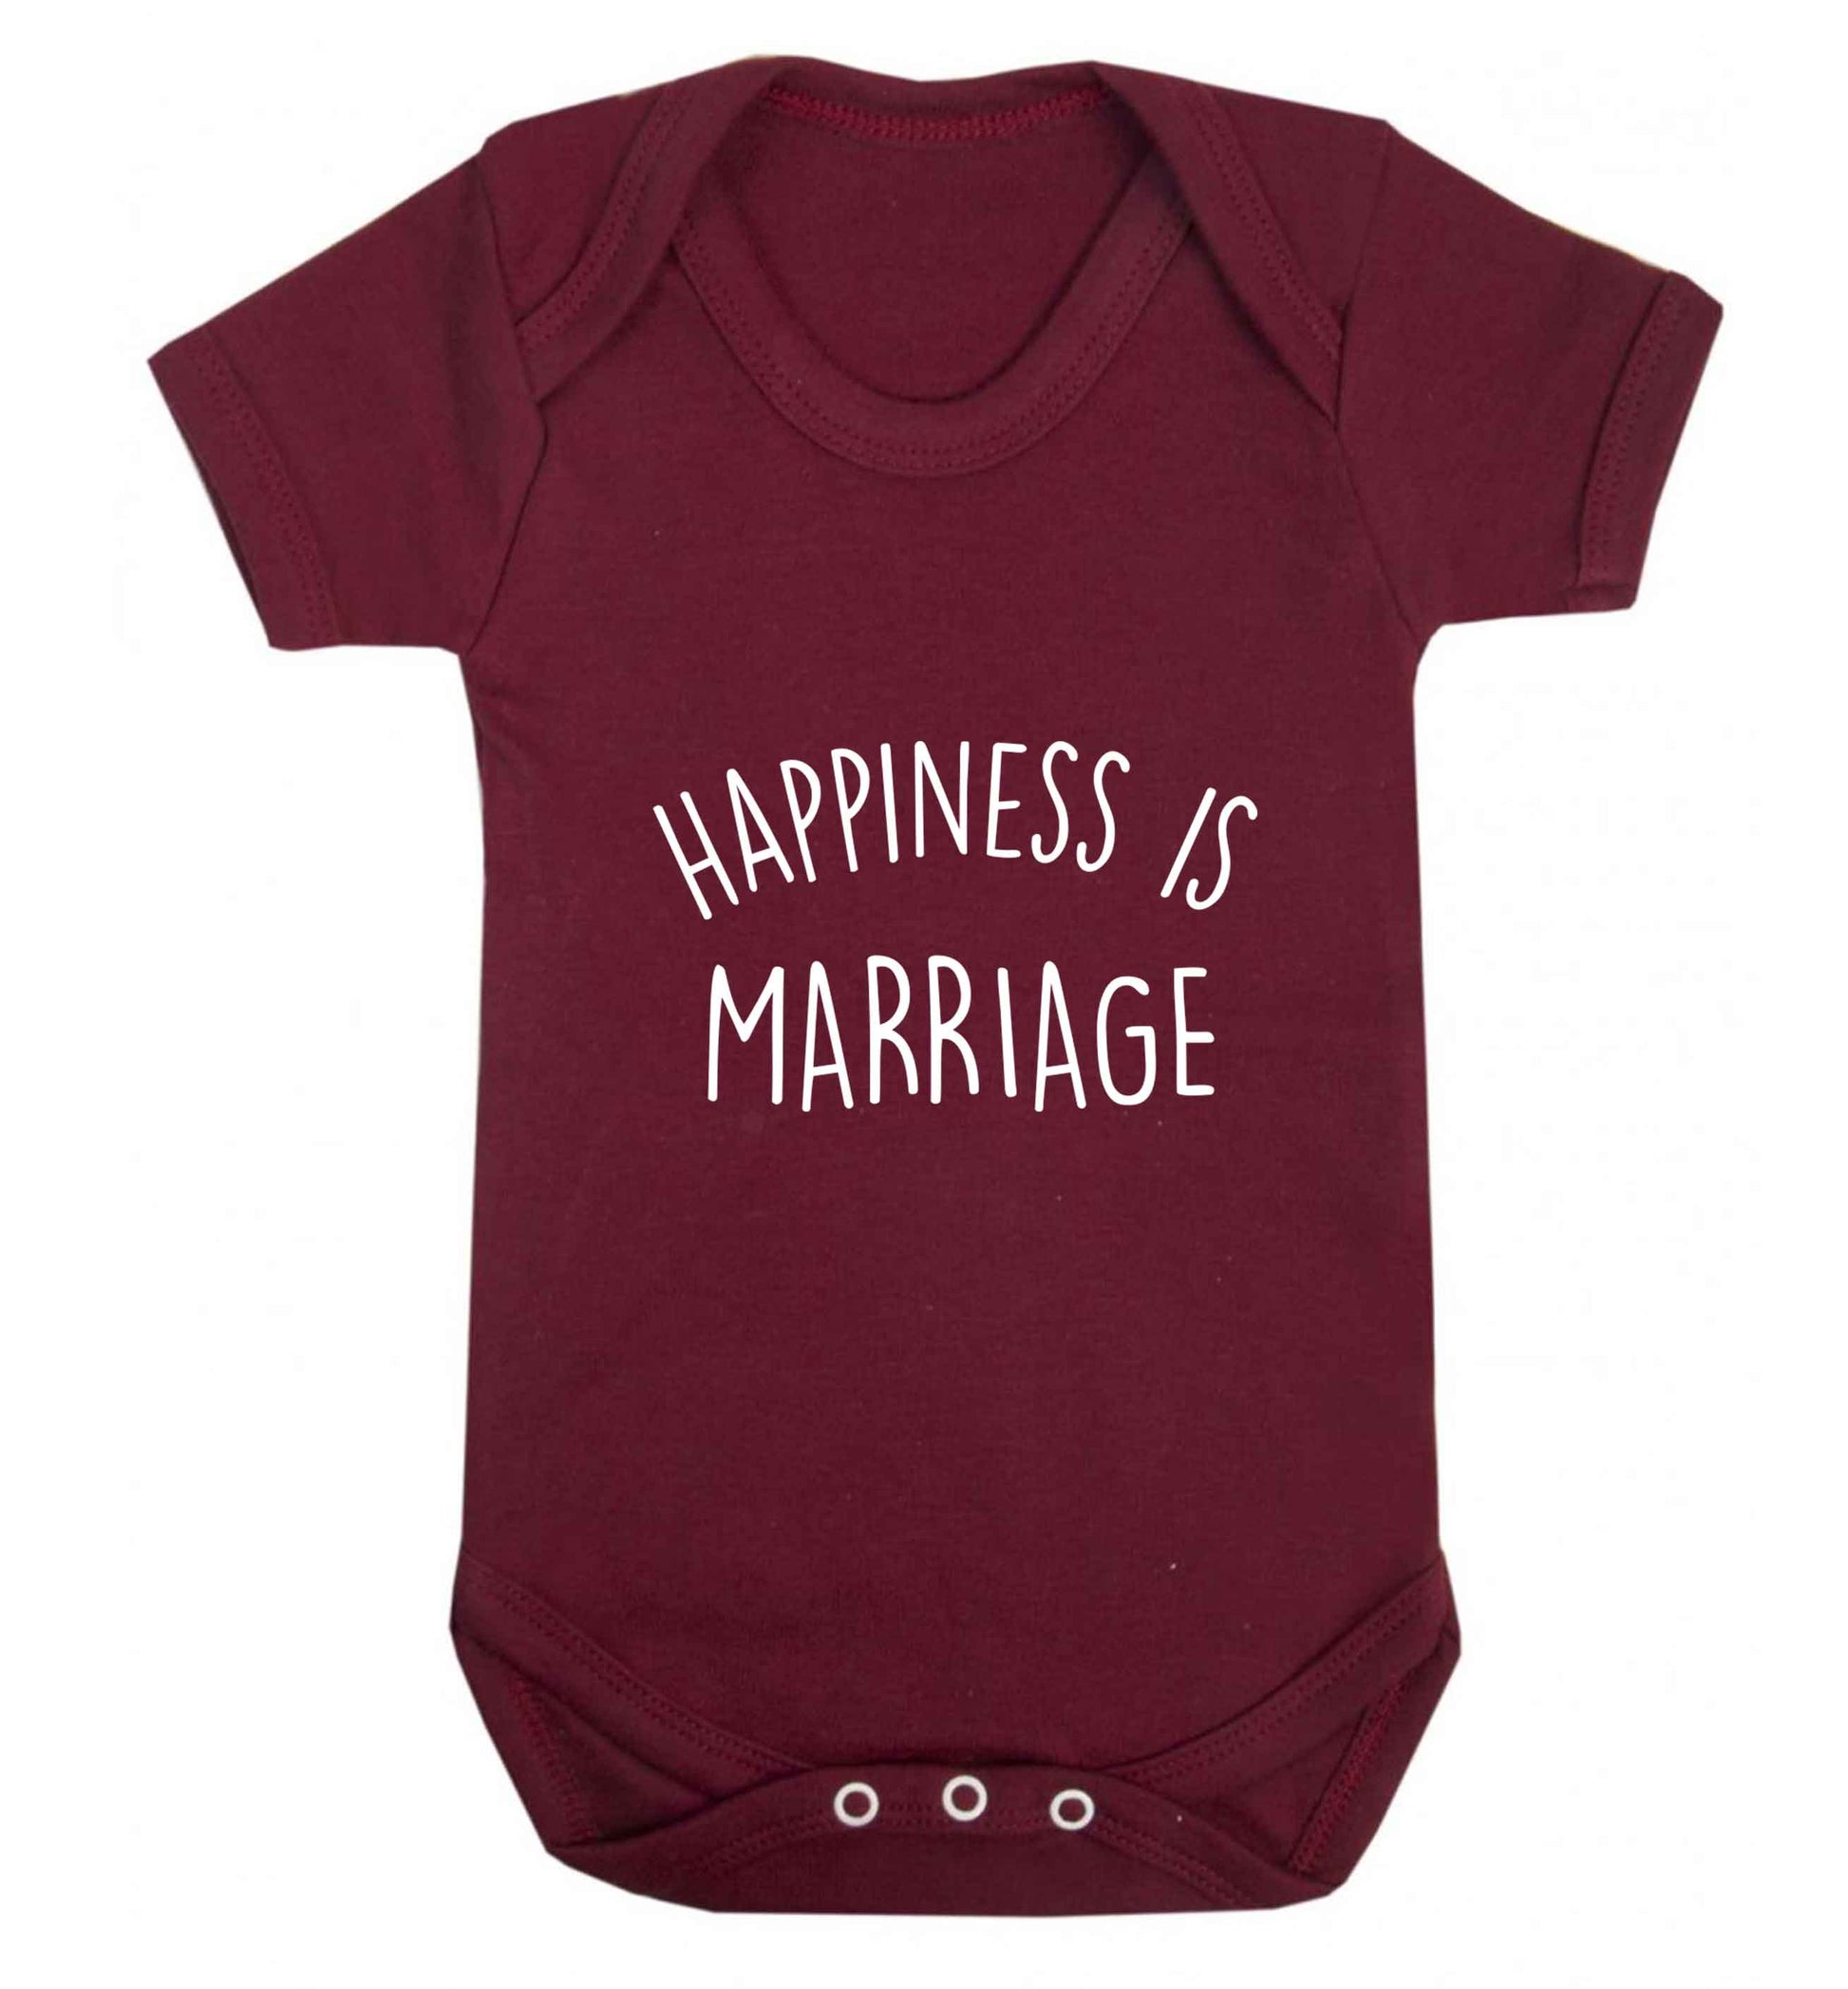 Happiness is marriage baby vest maroon 18-24 months